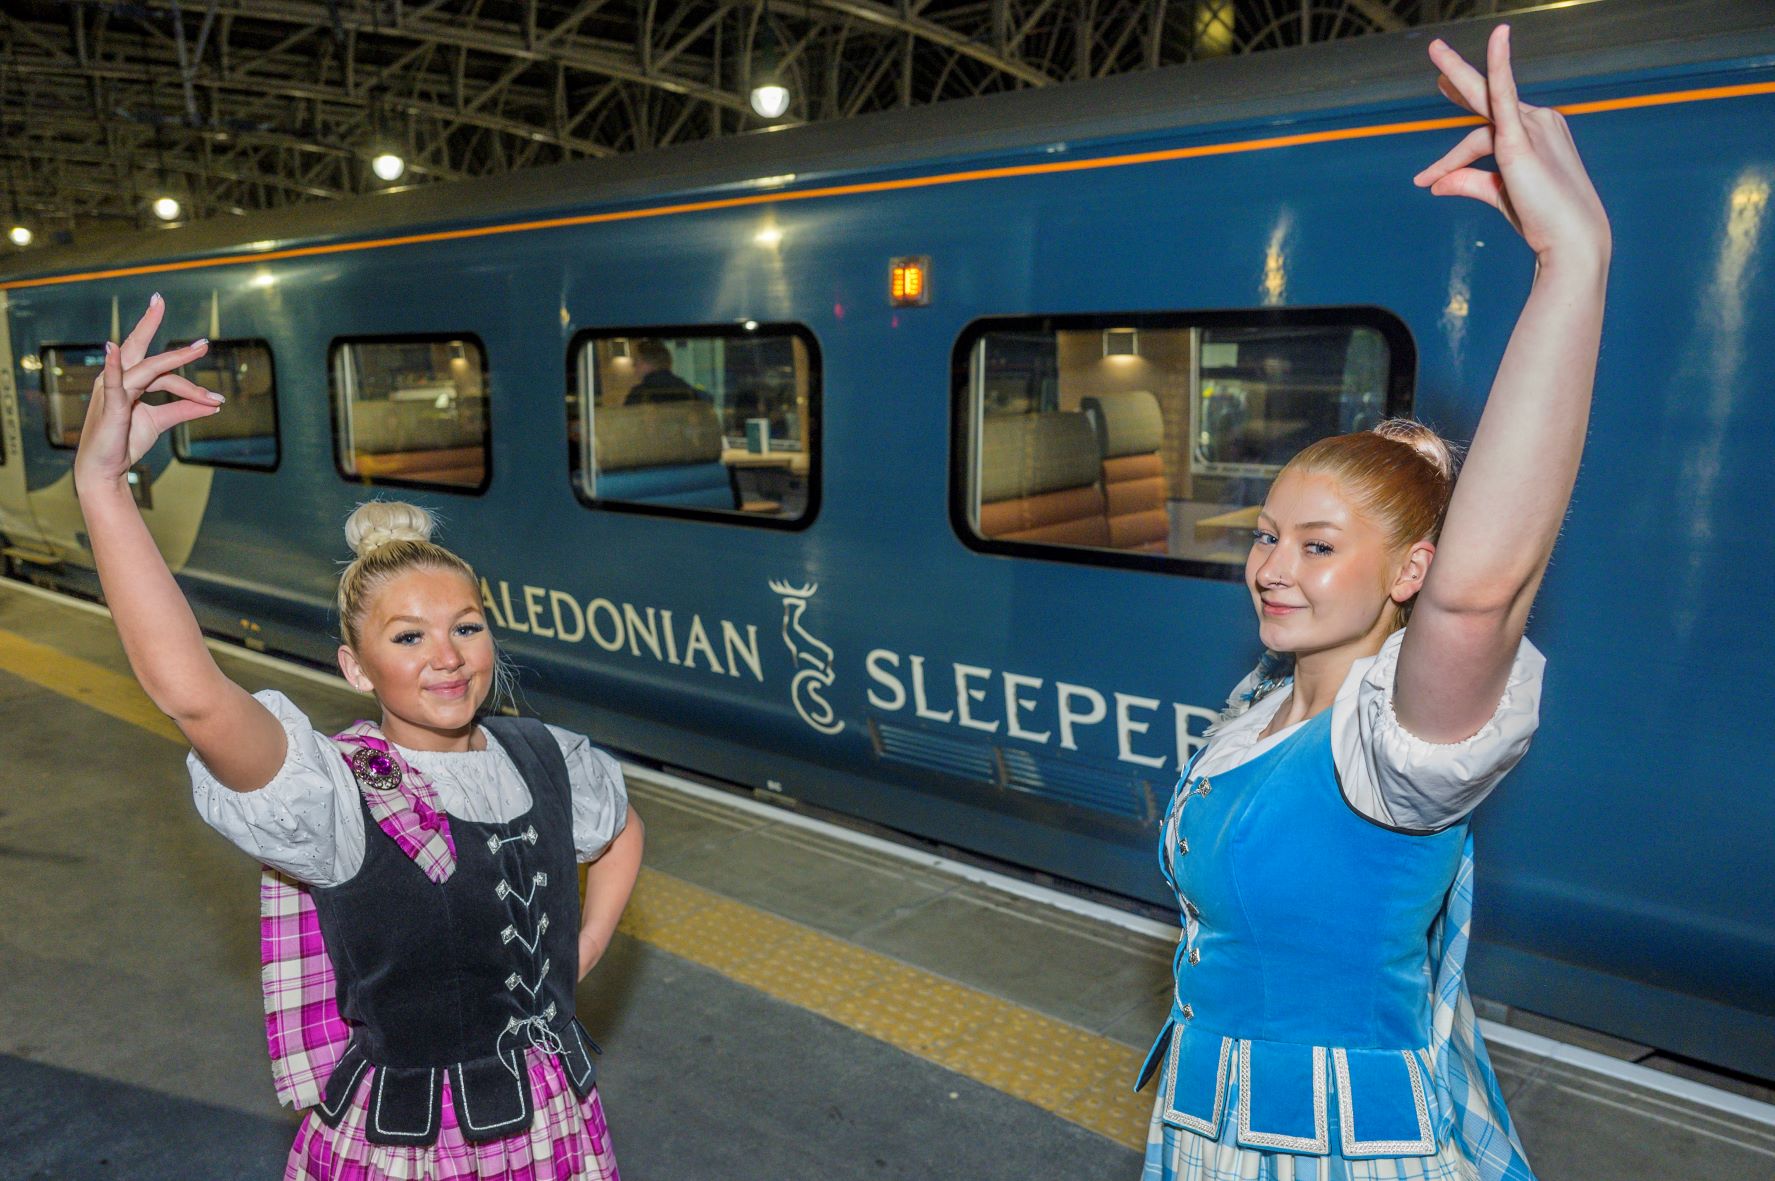 Limited-edition whisky celebrates 150 years of Caledonian Sleeper services